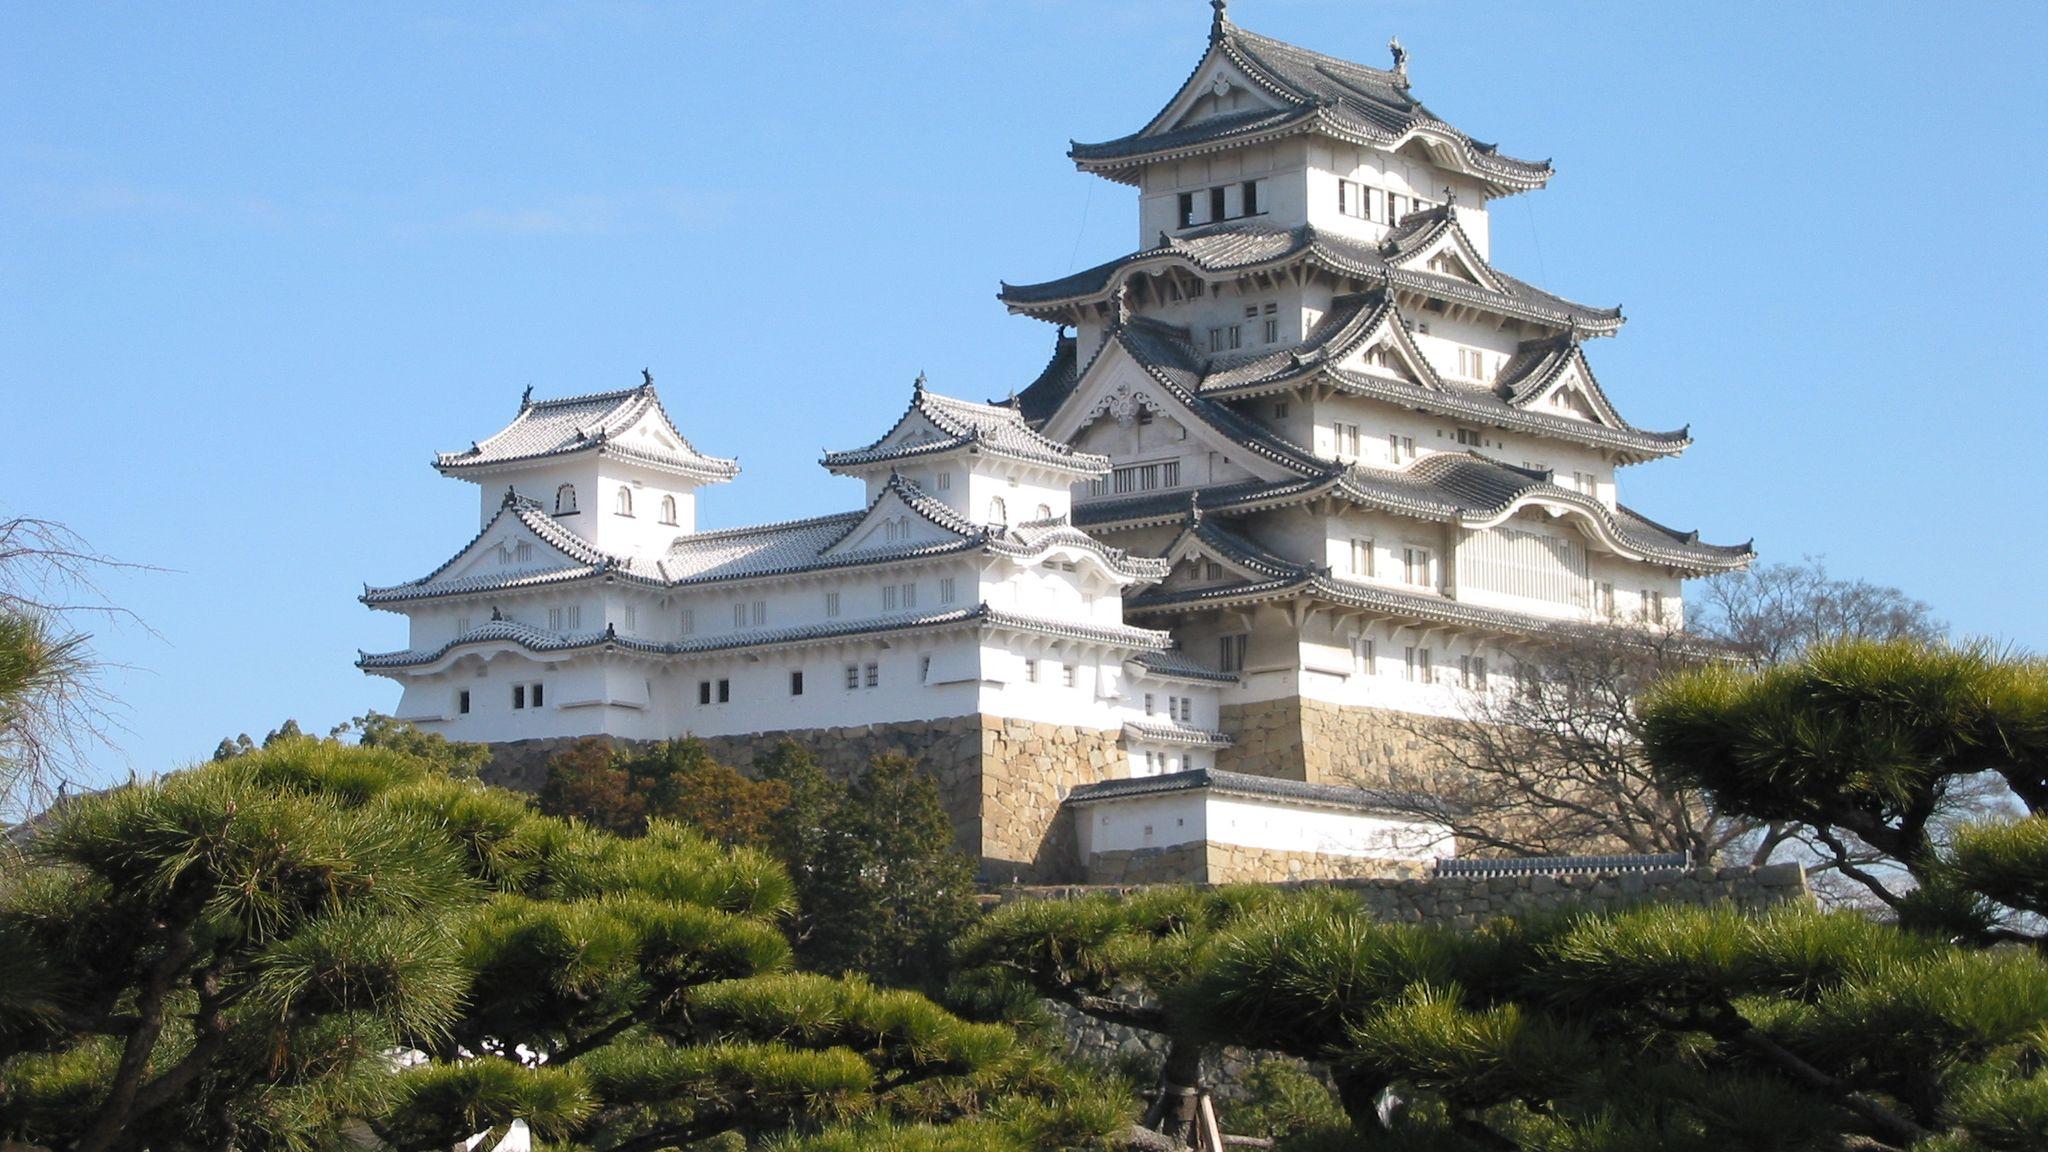 Himeji Castle, a World Heritage Site in Hyōgo Prefecture, is the most visited castle in Japan.